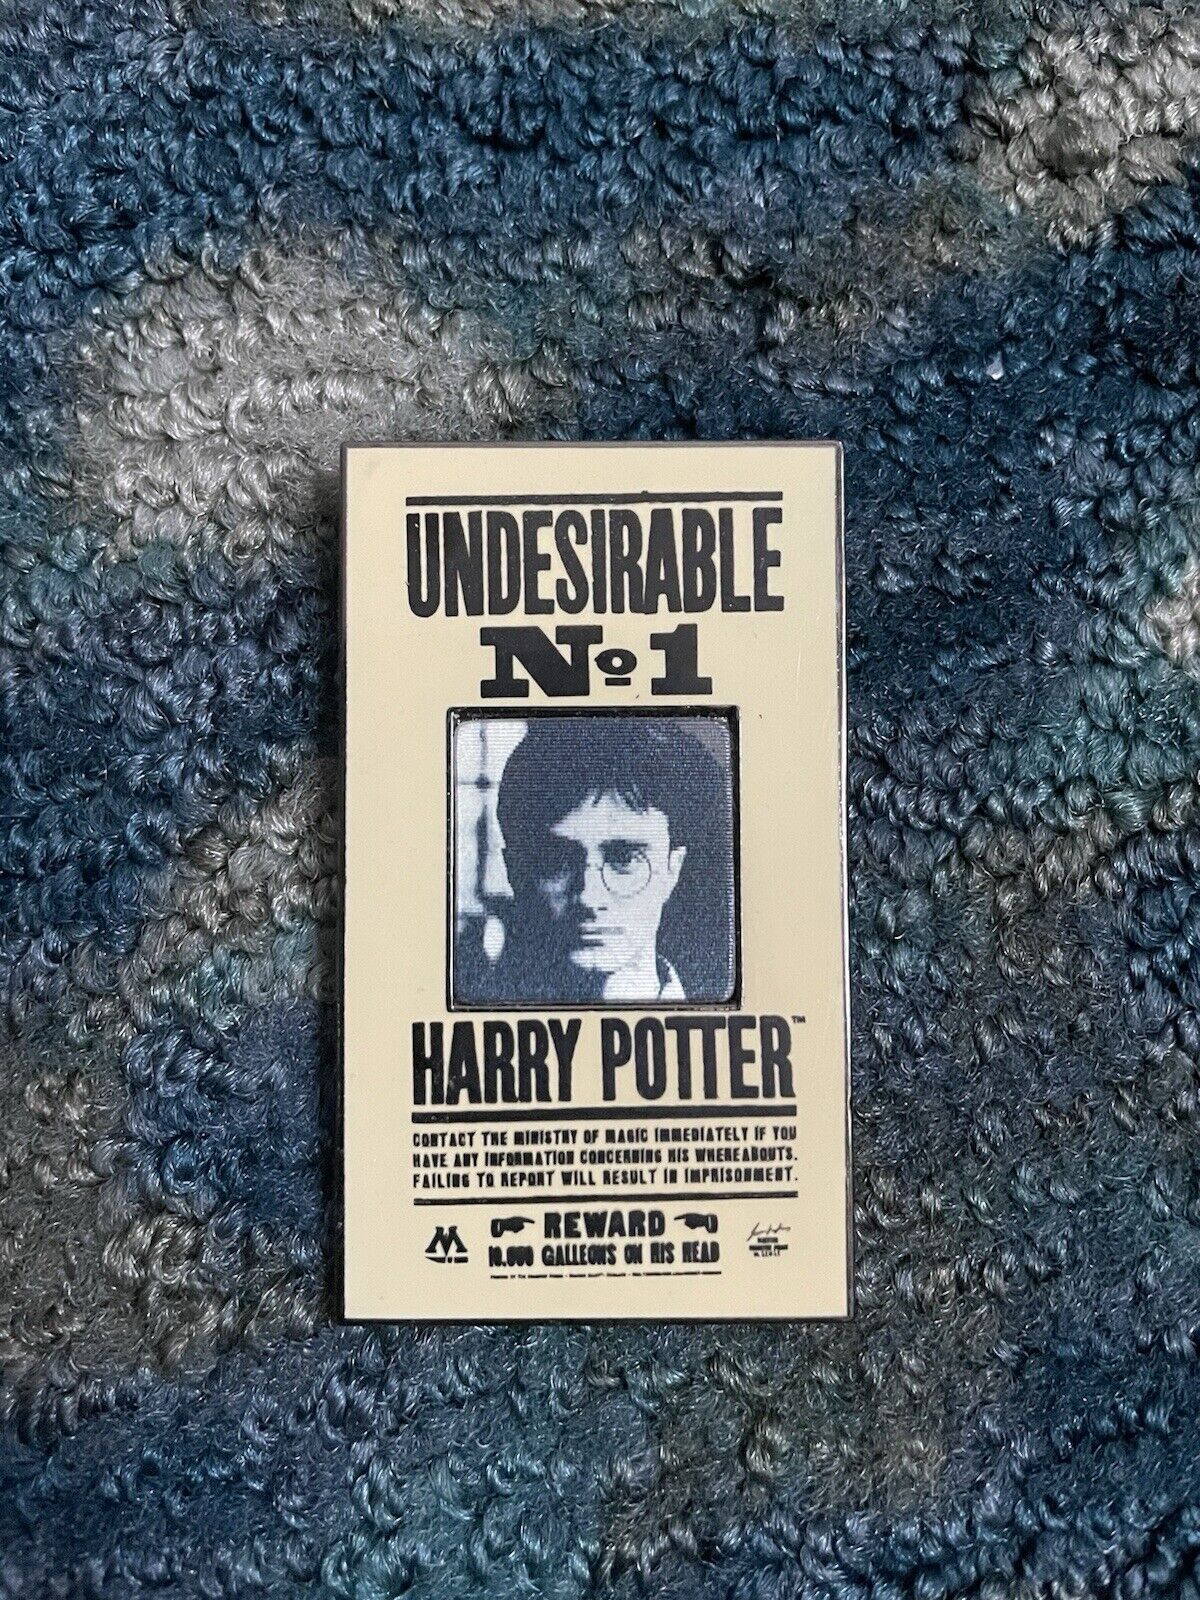 Official Harry Potter Store NYC Undesirable Number 1 Pin - Used No Card